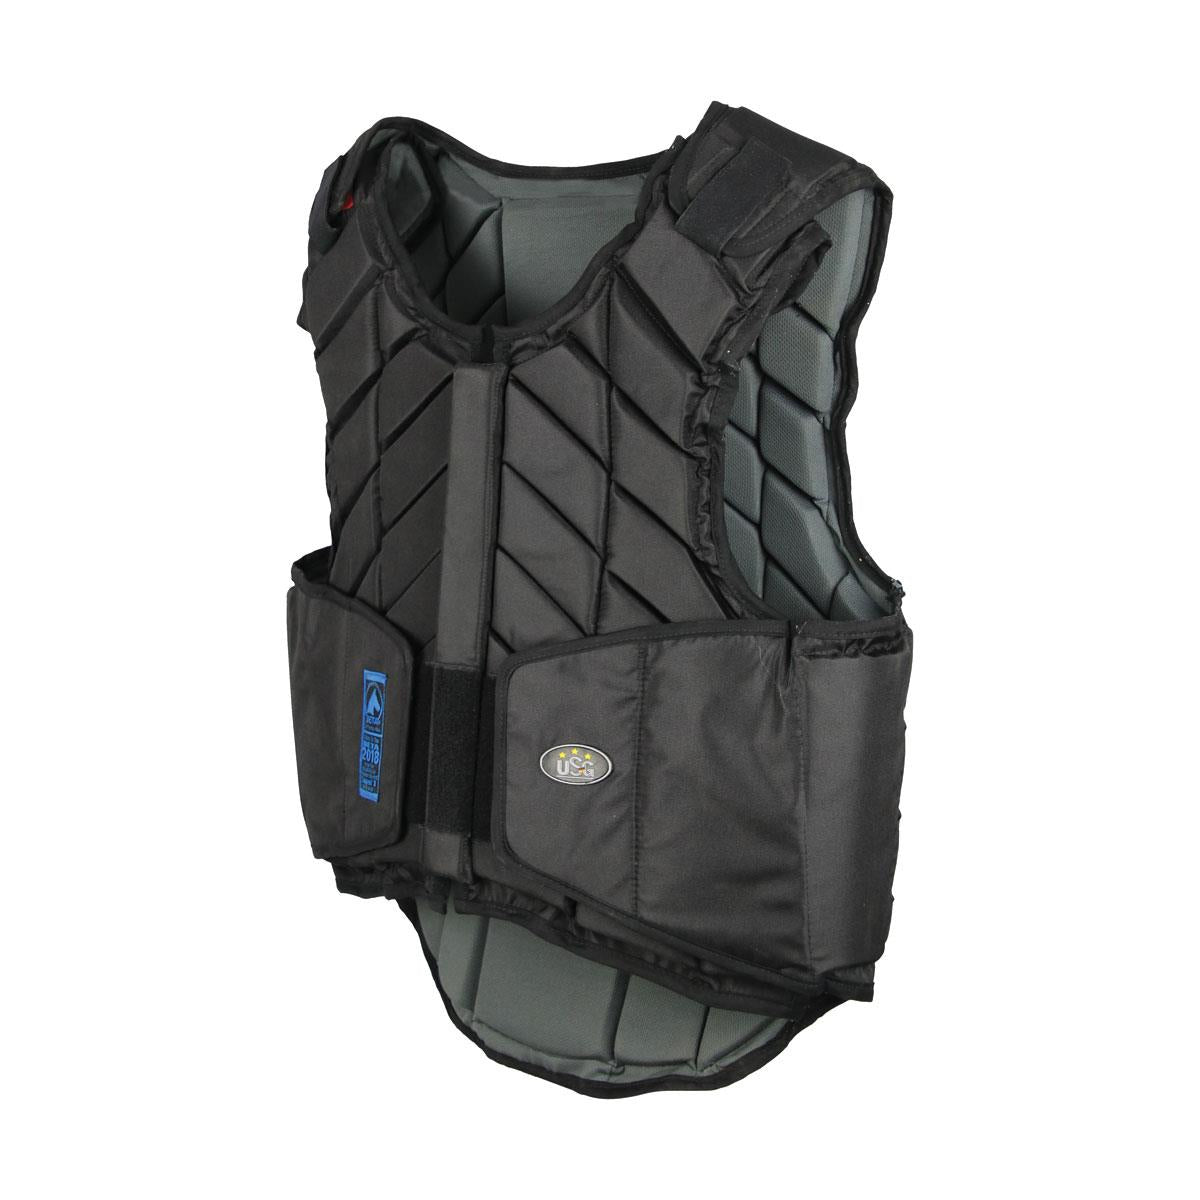 Usg Eco-Flexi Panel Body Protector - Just Horse Riders